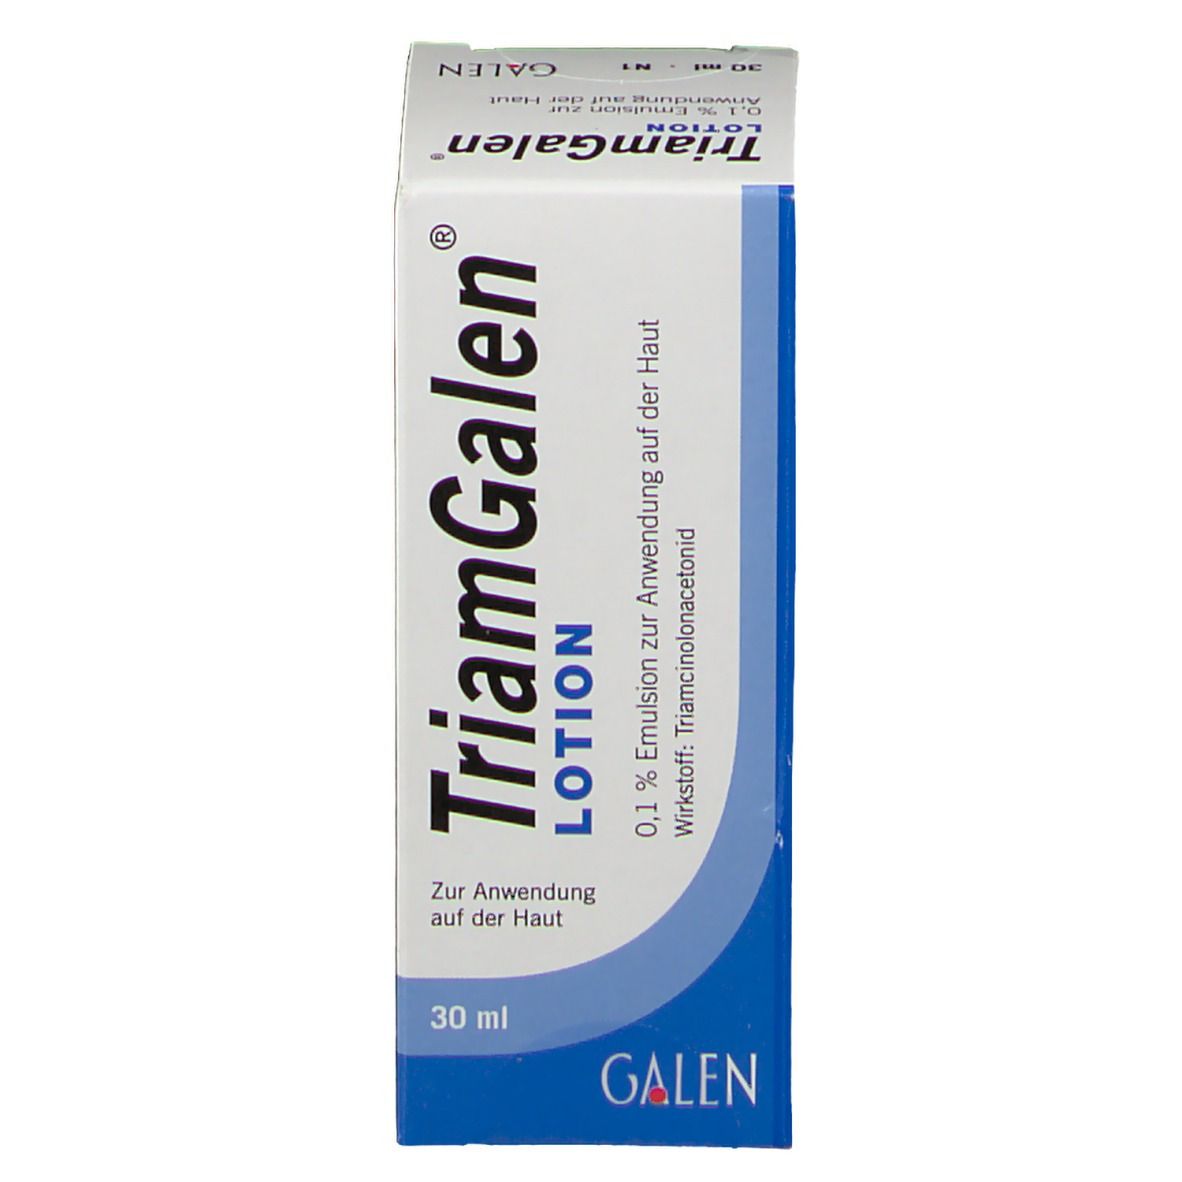 TriamGalen® Lotion